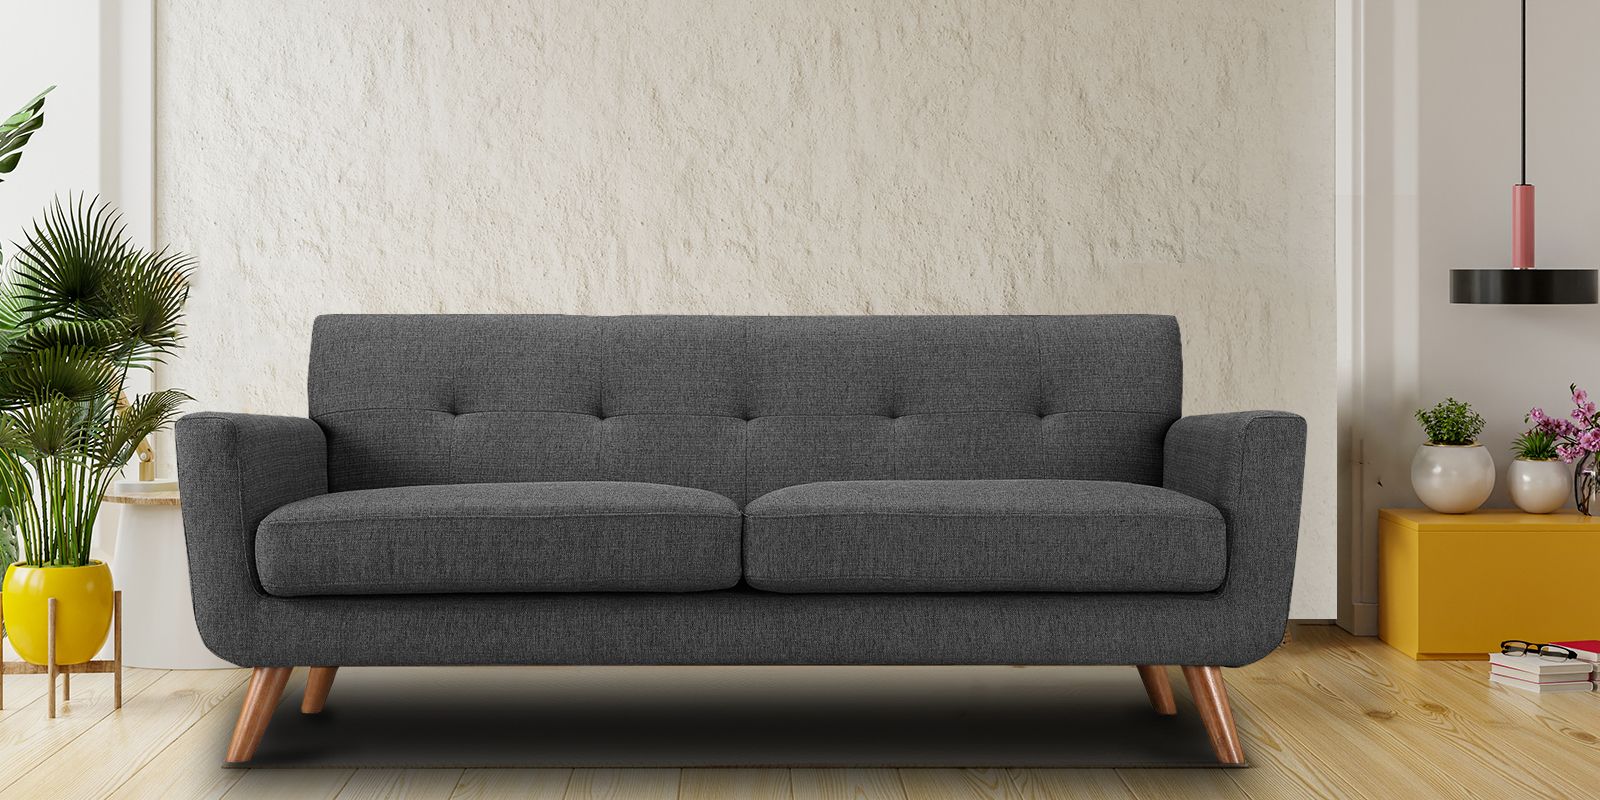 Trendy Mid Century Classic 3 Seater Sofa In Grey Colour – Dreamzz Furniture For Mid Century 3 Seat Couches (View 3 of 15)